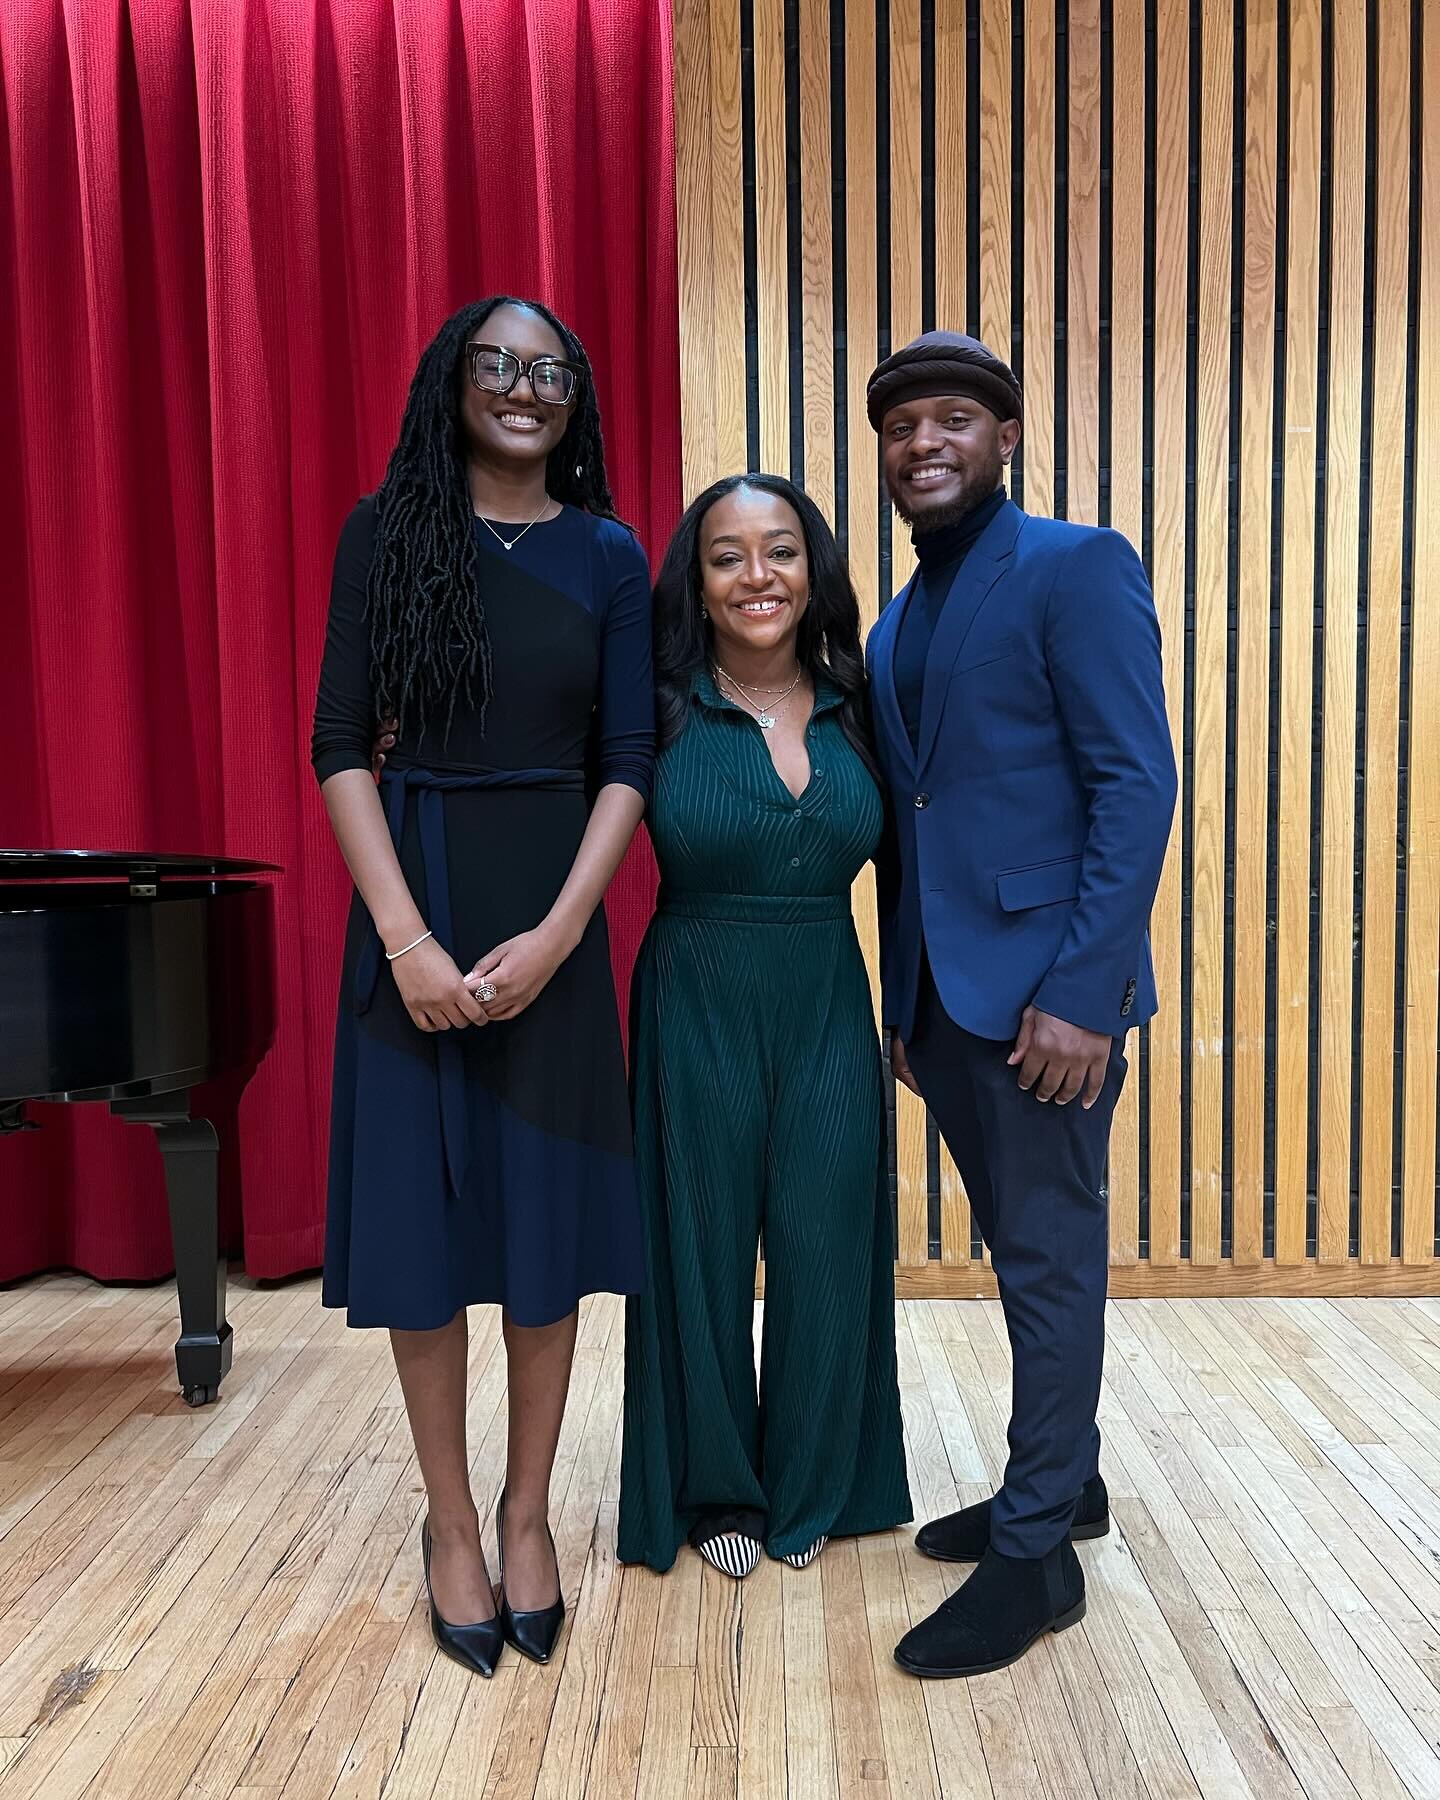 Morris &amp; Friends: Masterclass #1 with @brandie_inez at @howardumusic .

Congratulations to Shikahi Jones and Sanaa Stephen!

And thank you to @caapaarts for making this possible!

Morris &amp; Friends: An Evening of Opera &amp; Gospel.
Saturday, 